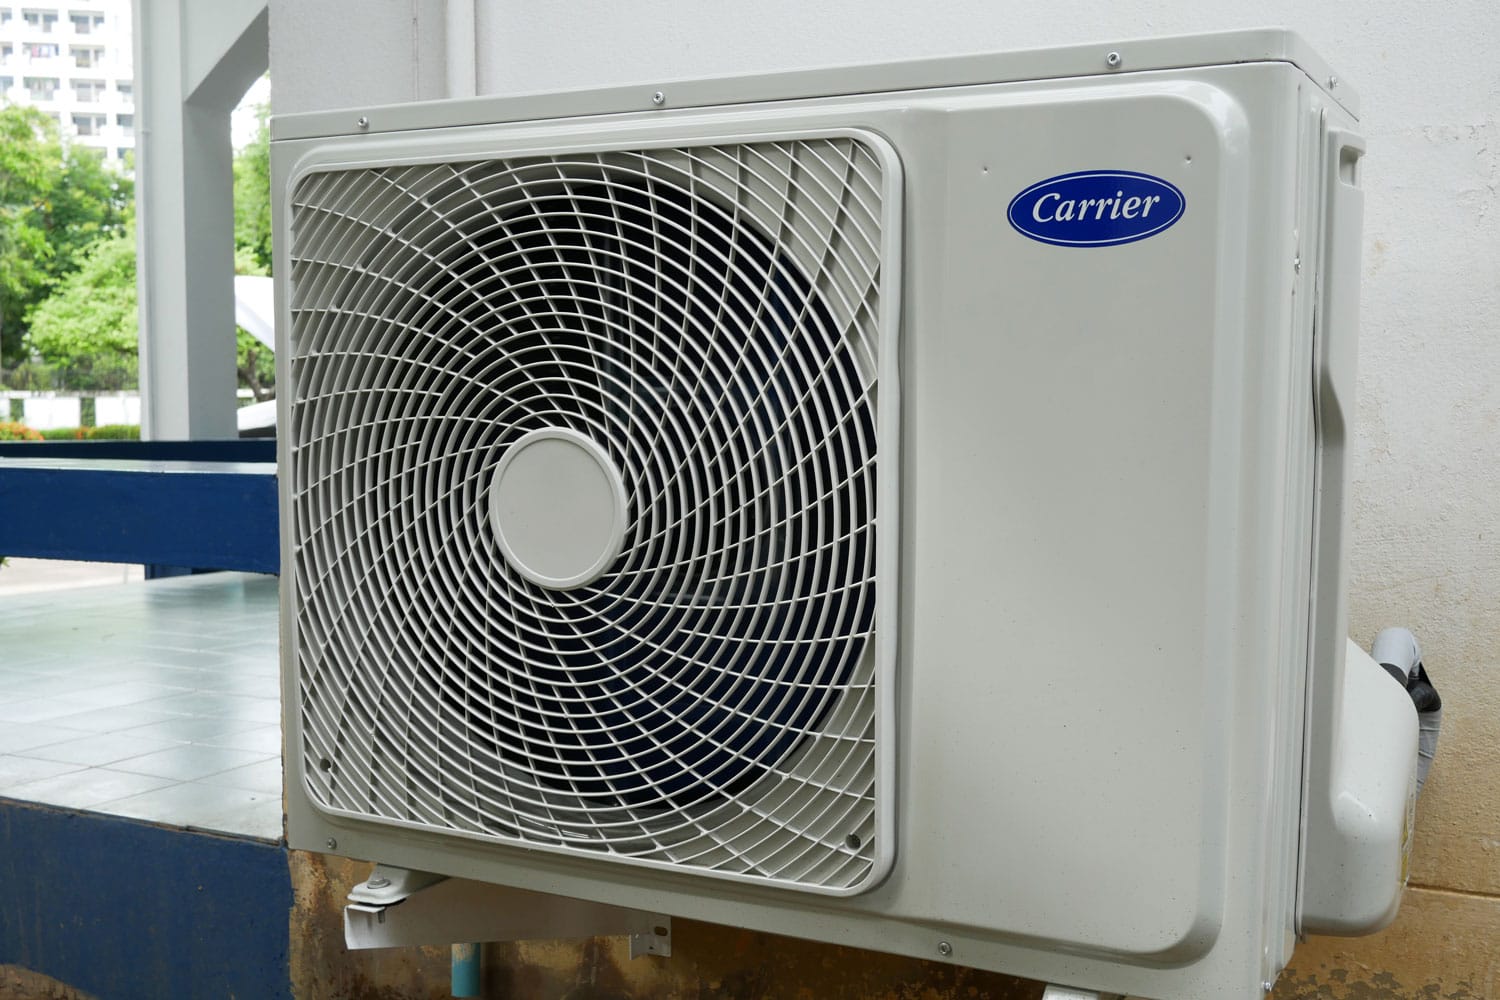 A big Carrier air conditioning unit mounted on reinforced metal brackets, Carrier AC Fan Won't Shut Off—What's Wrong? 